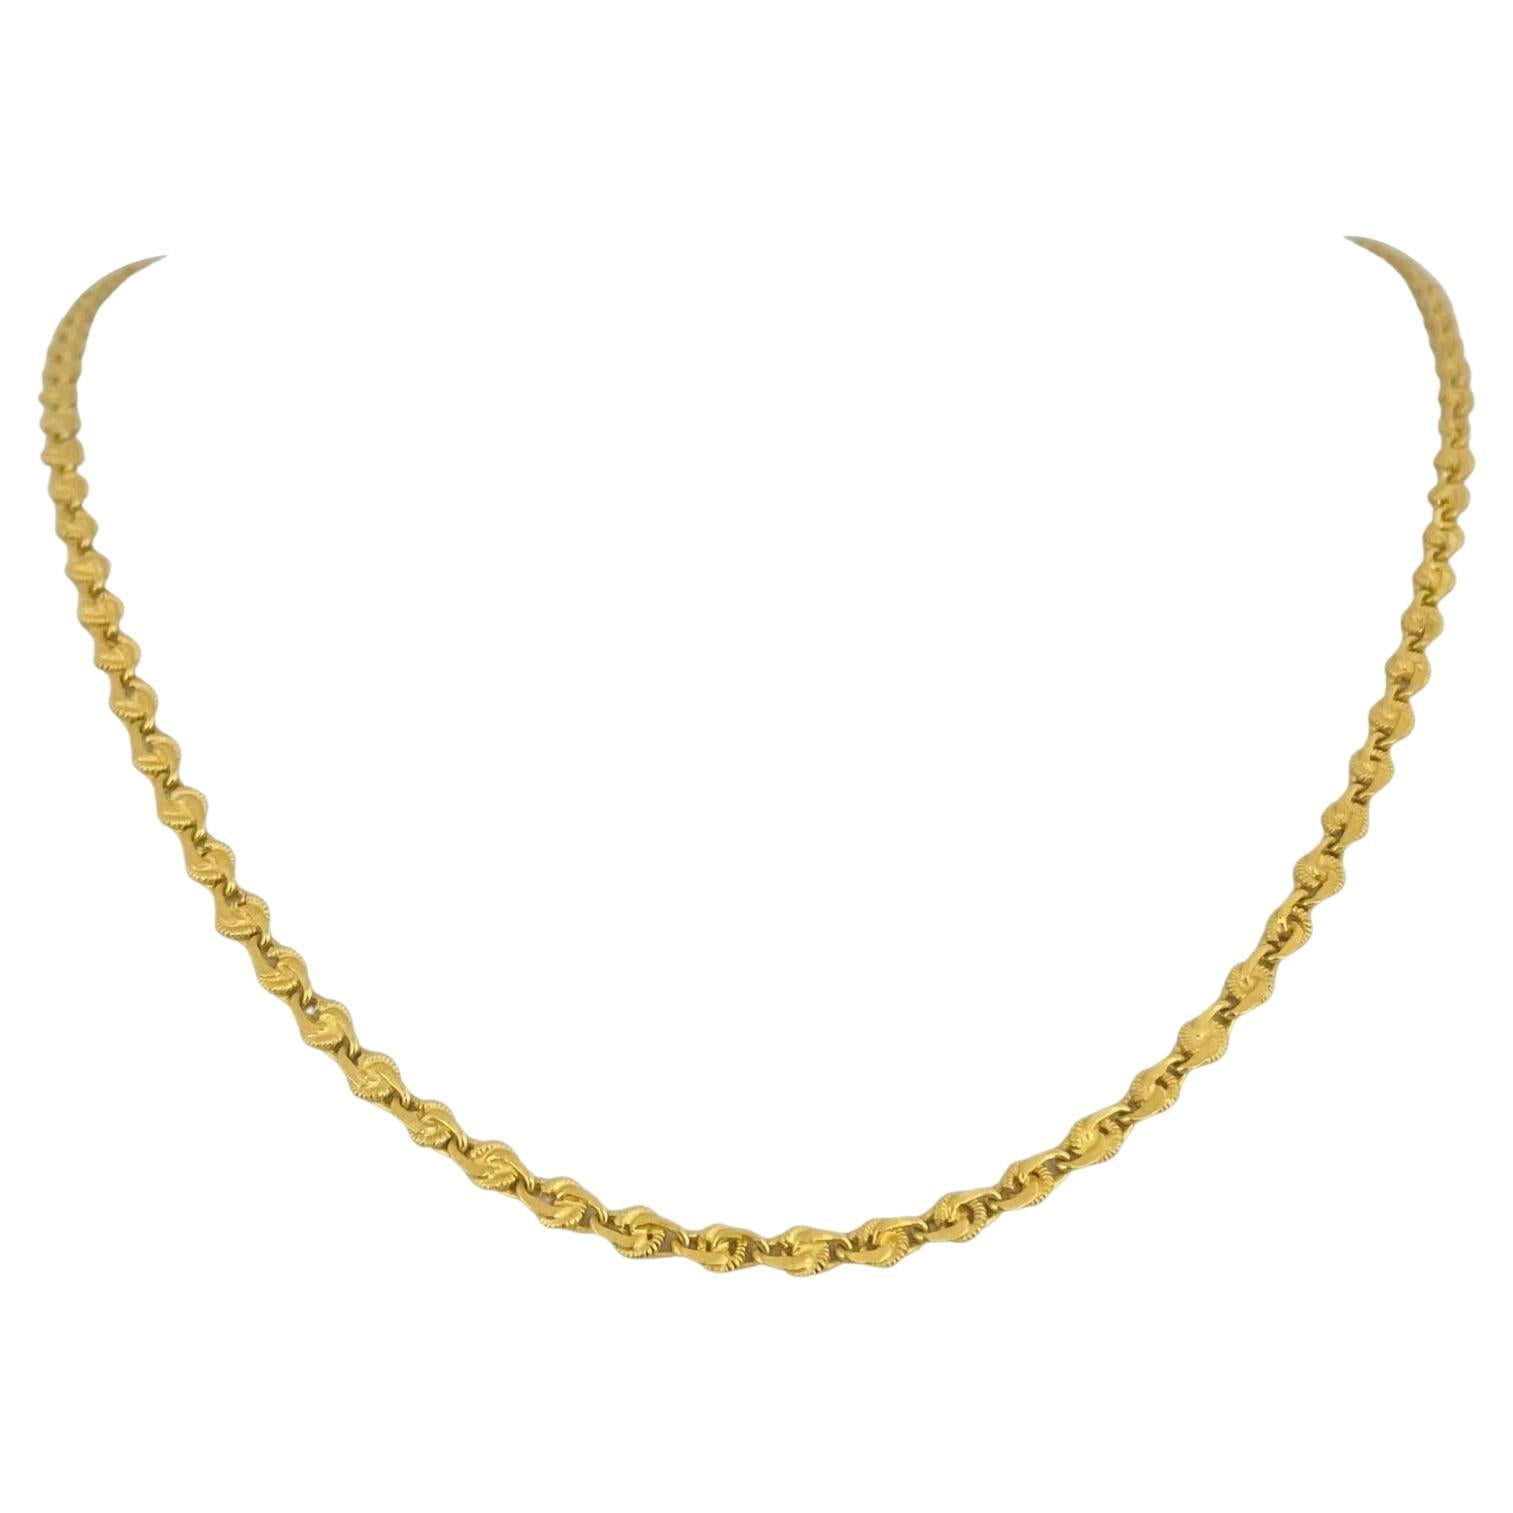 22 Karat Yellow Gold Solid Heavy Fancy Spiral Curb Link Chain Necklace